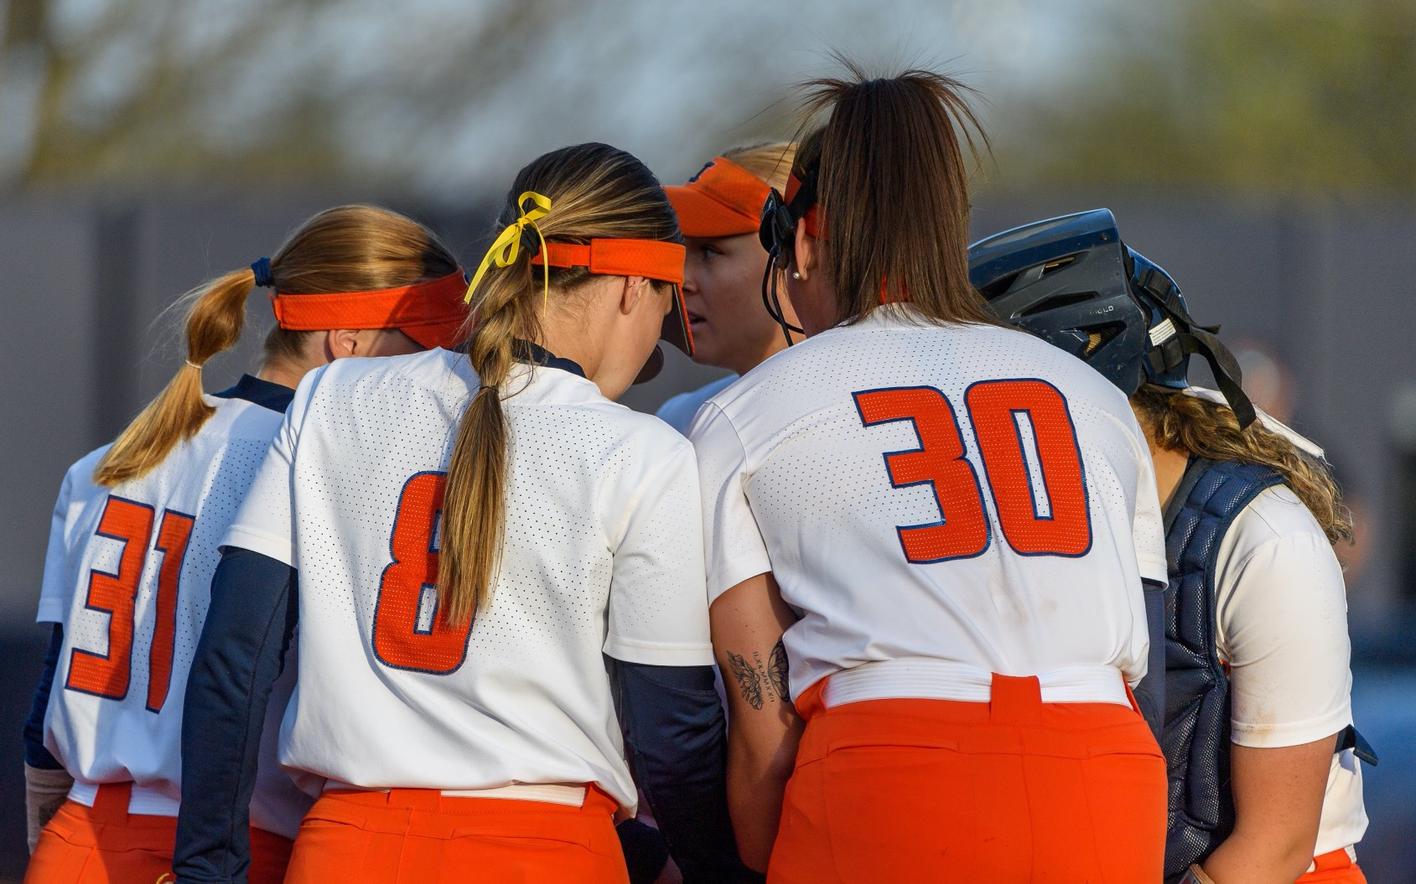 Infielders meet on the pitchers mound during a previous Illini Softball contest